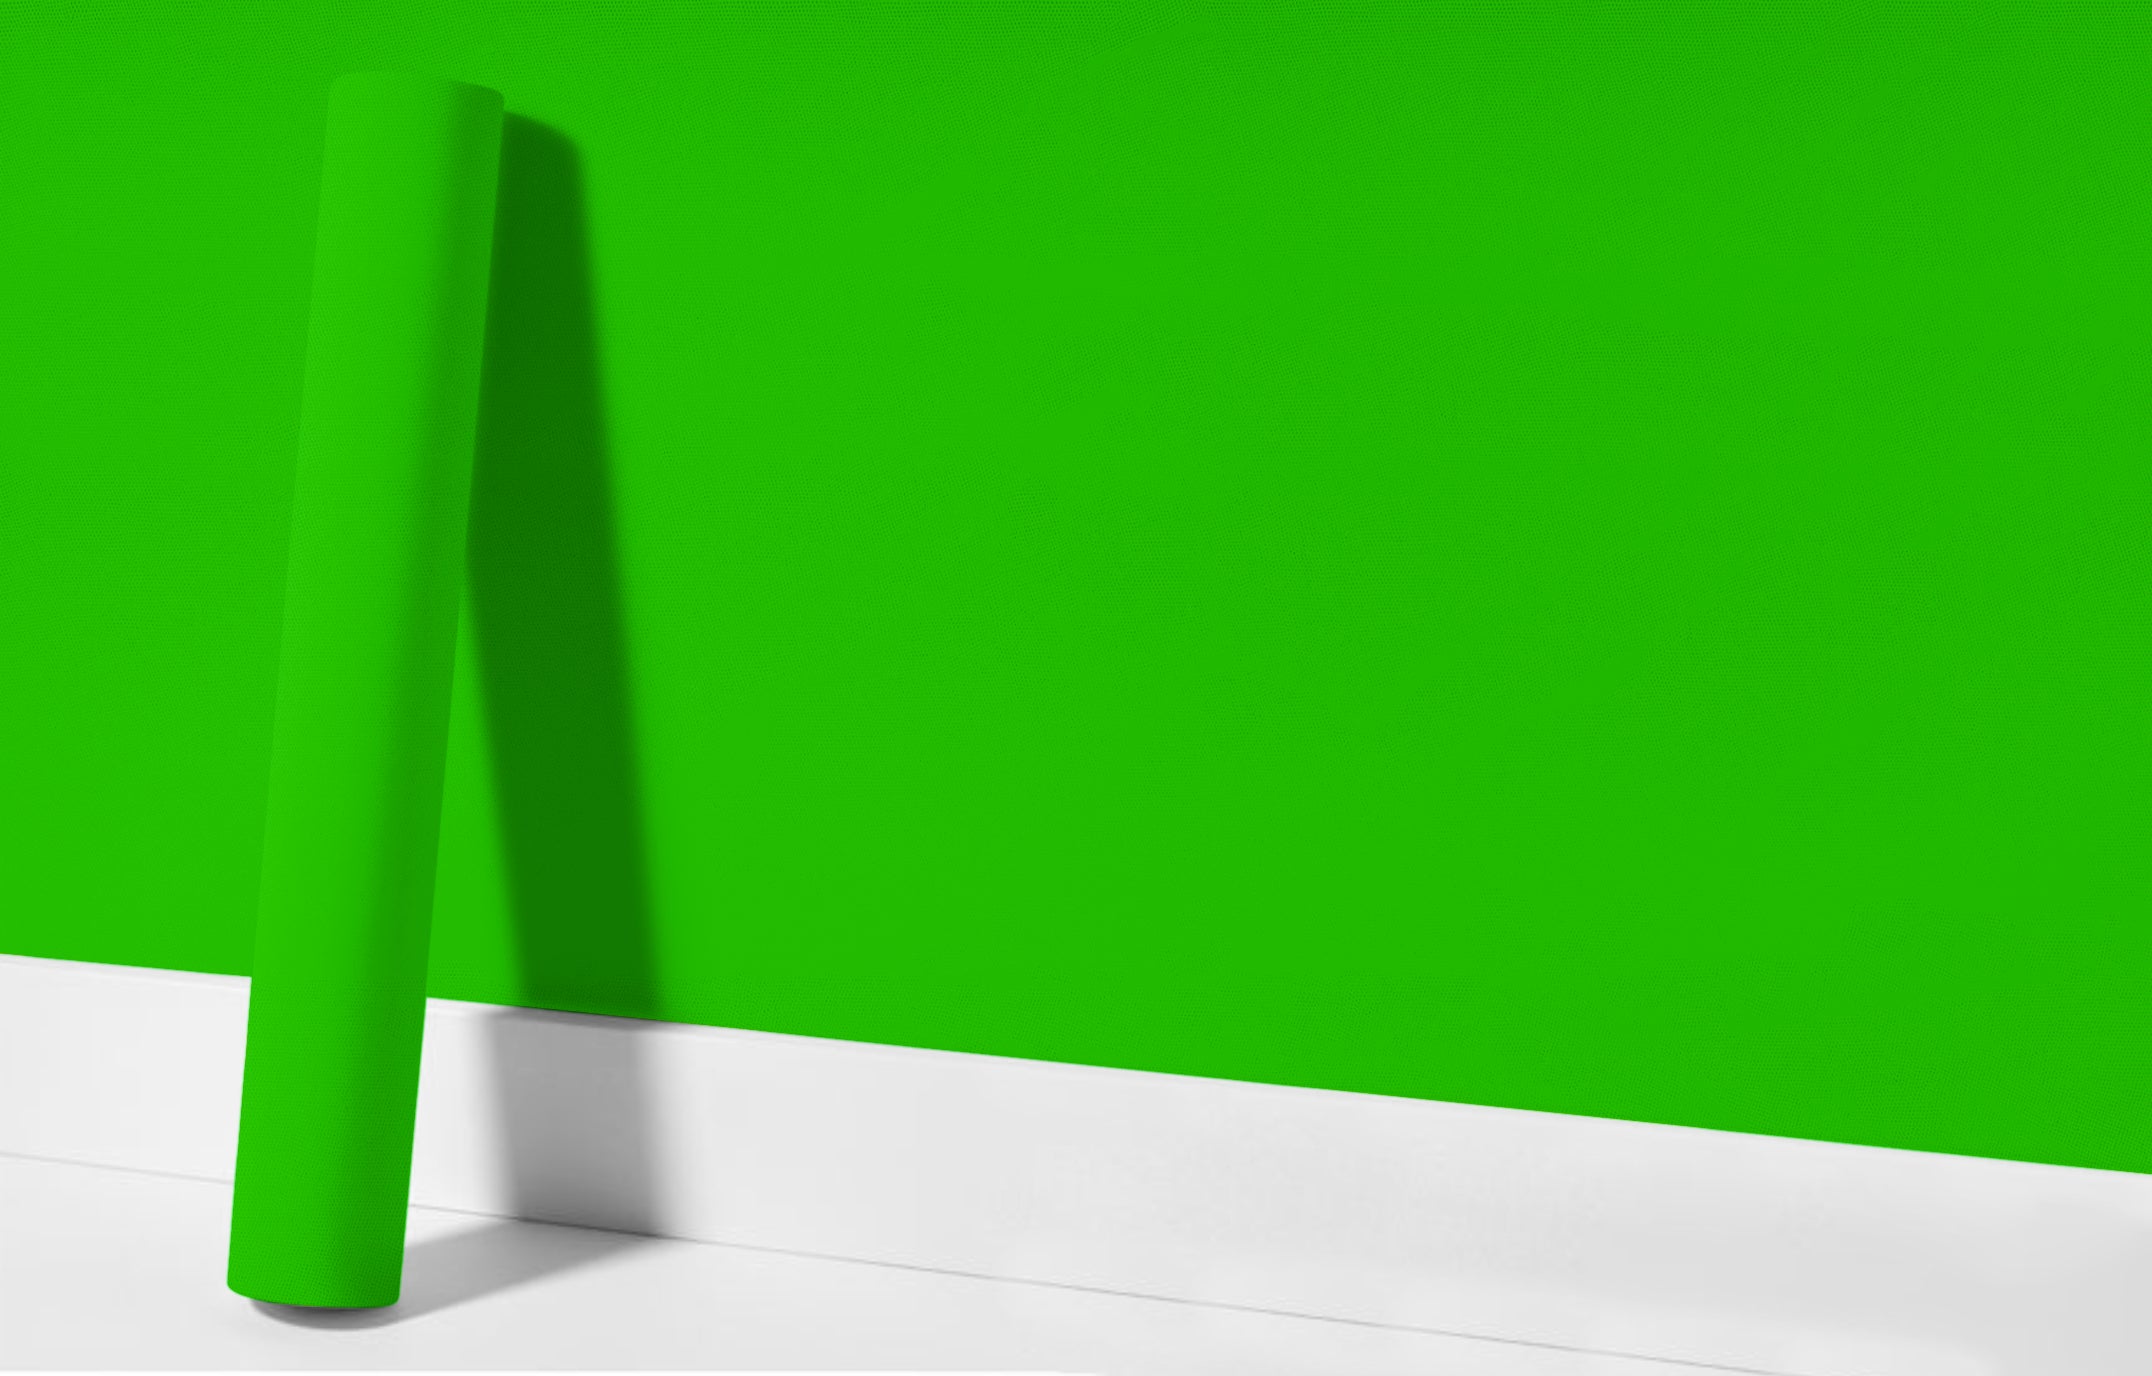 Peel & Stick Removable Re-usable Paint - Color RAL 6038 Luminous Green - offRAL™ - RALRAW LLC, USA